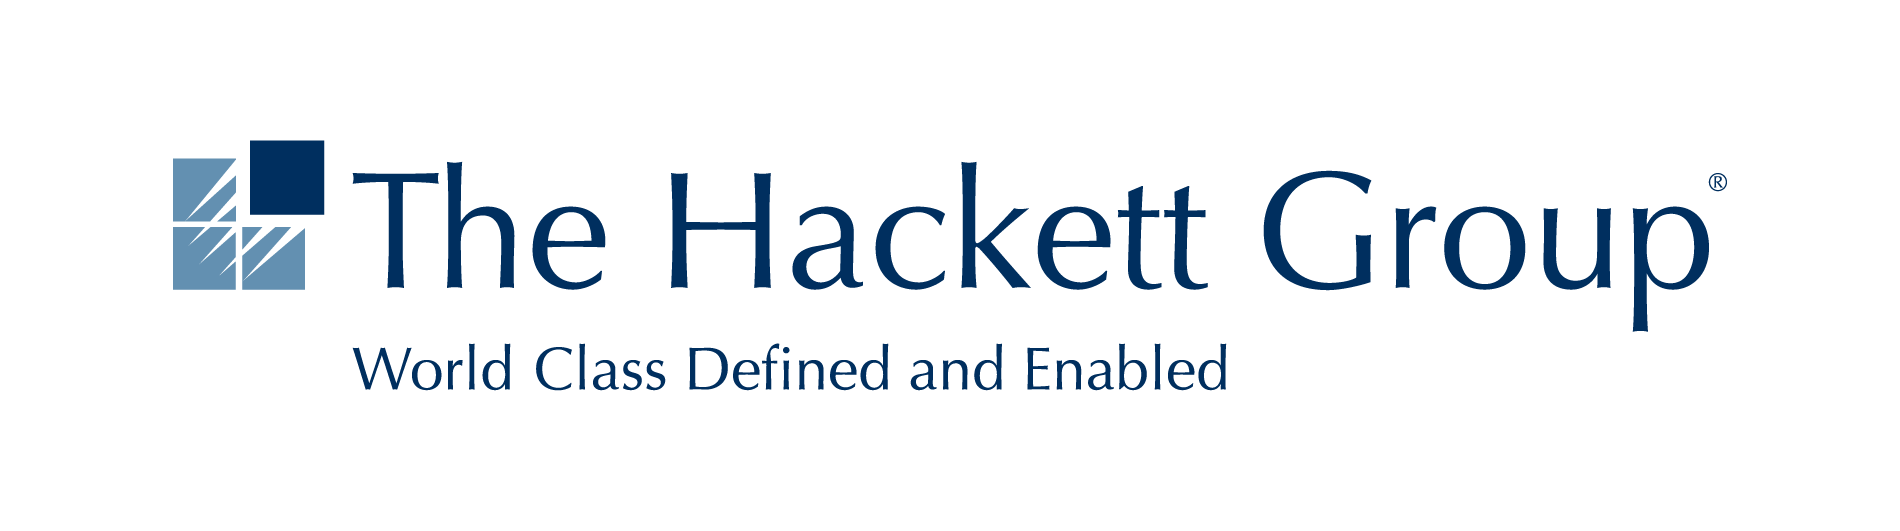 The Hackett Group. World class defined and enabled